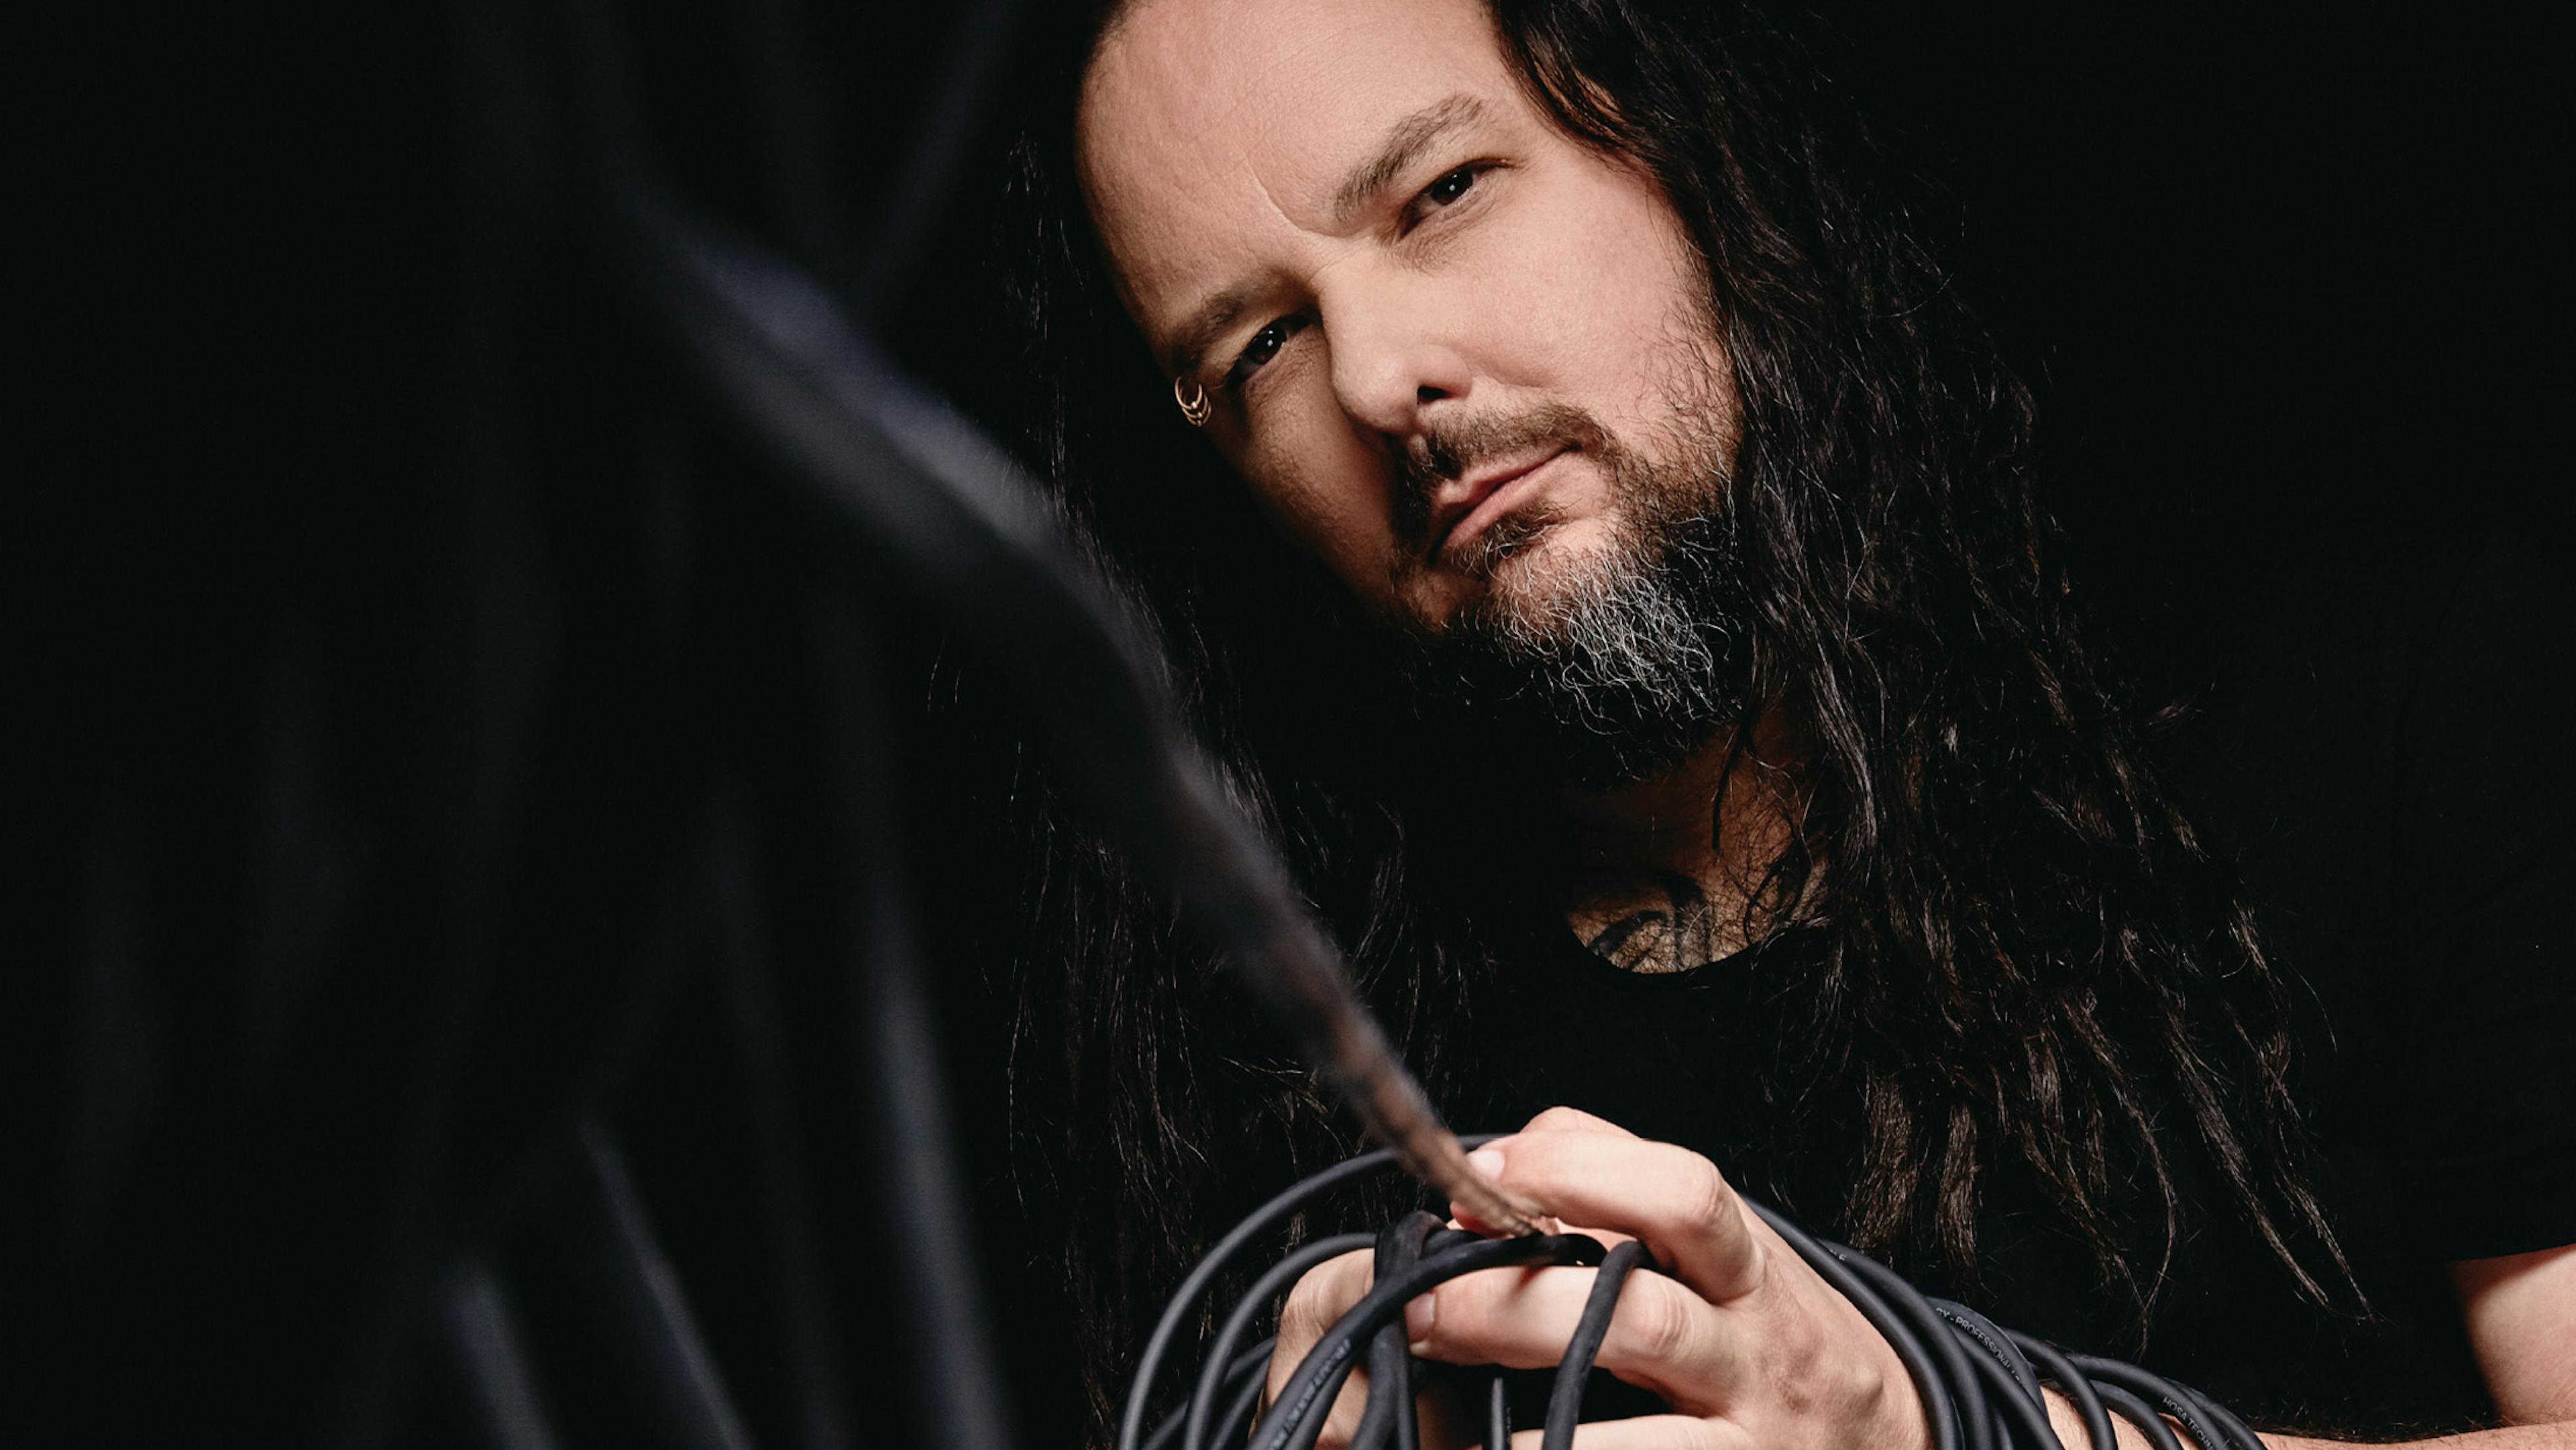 Korn's Jonathan Davis: "Every Time I Listen To The Nothing I Start Crying"